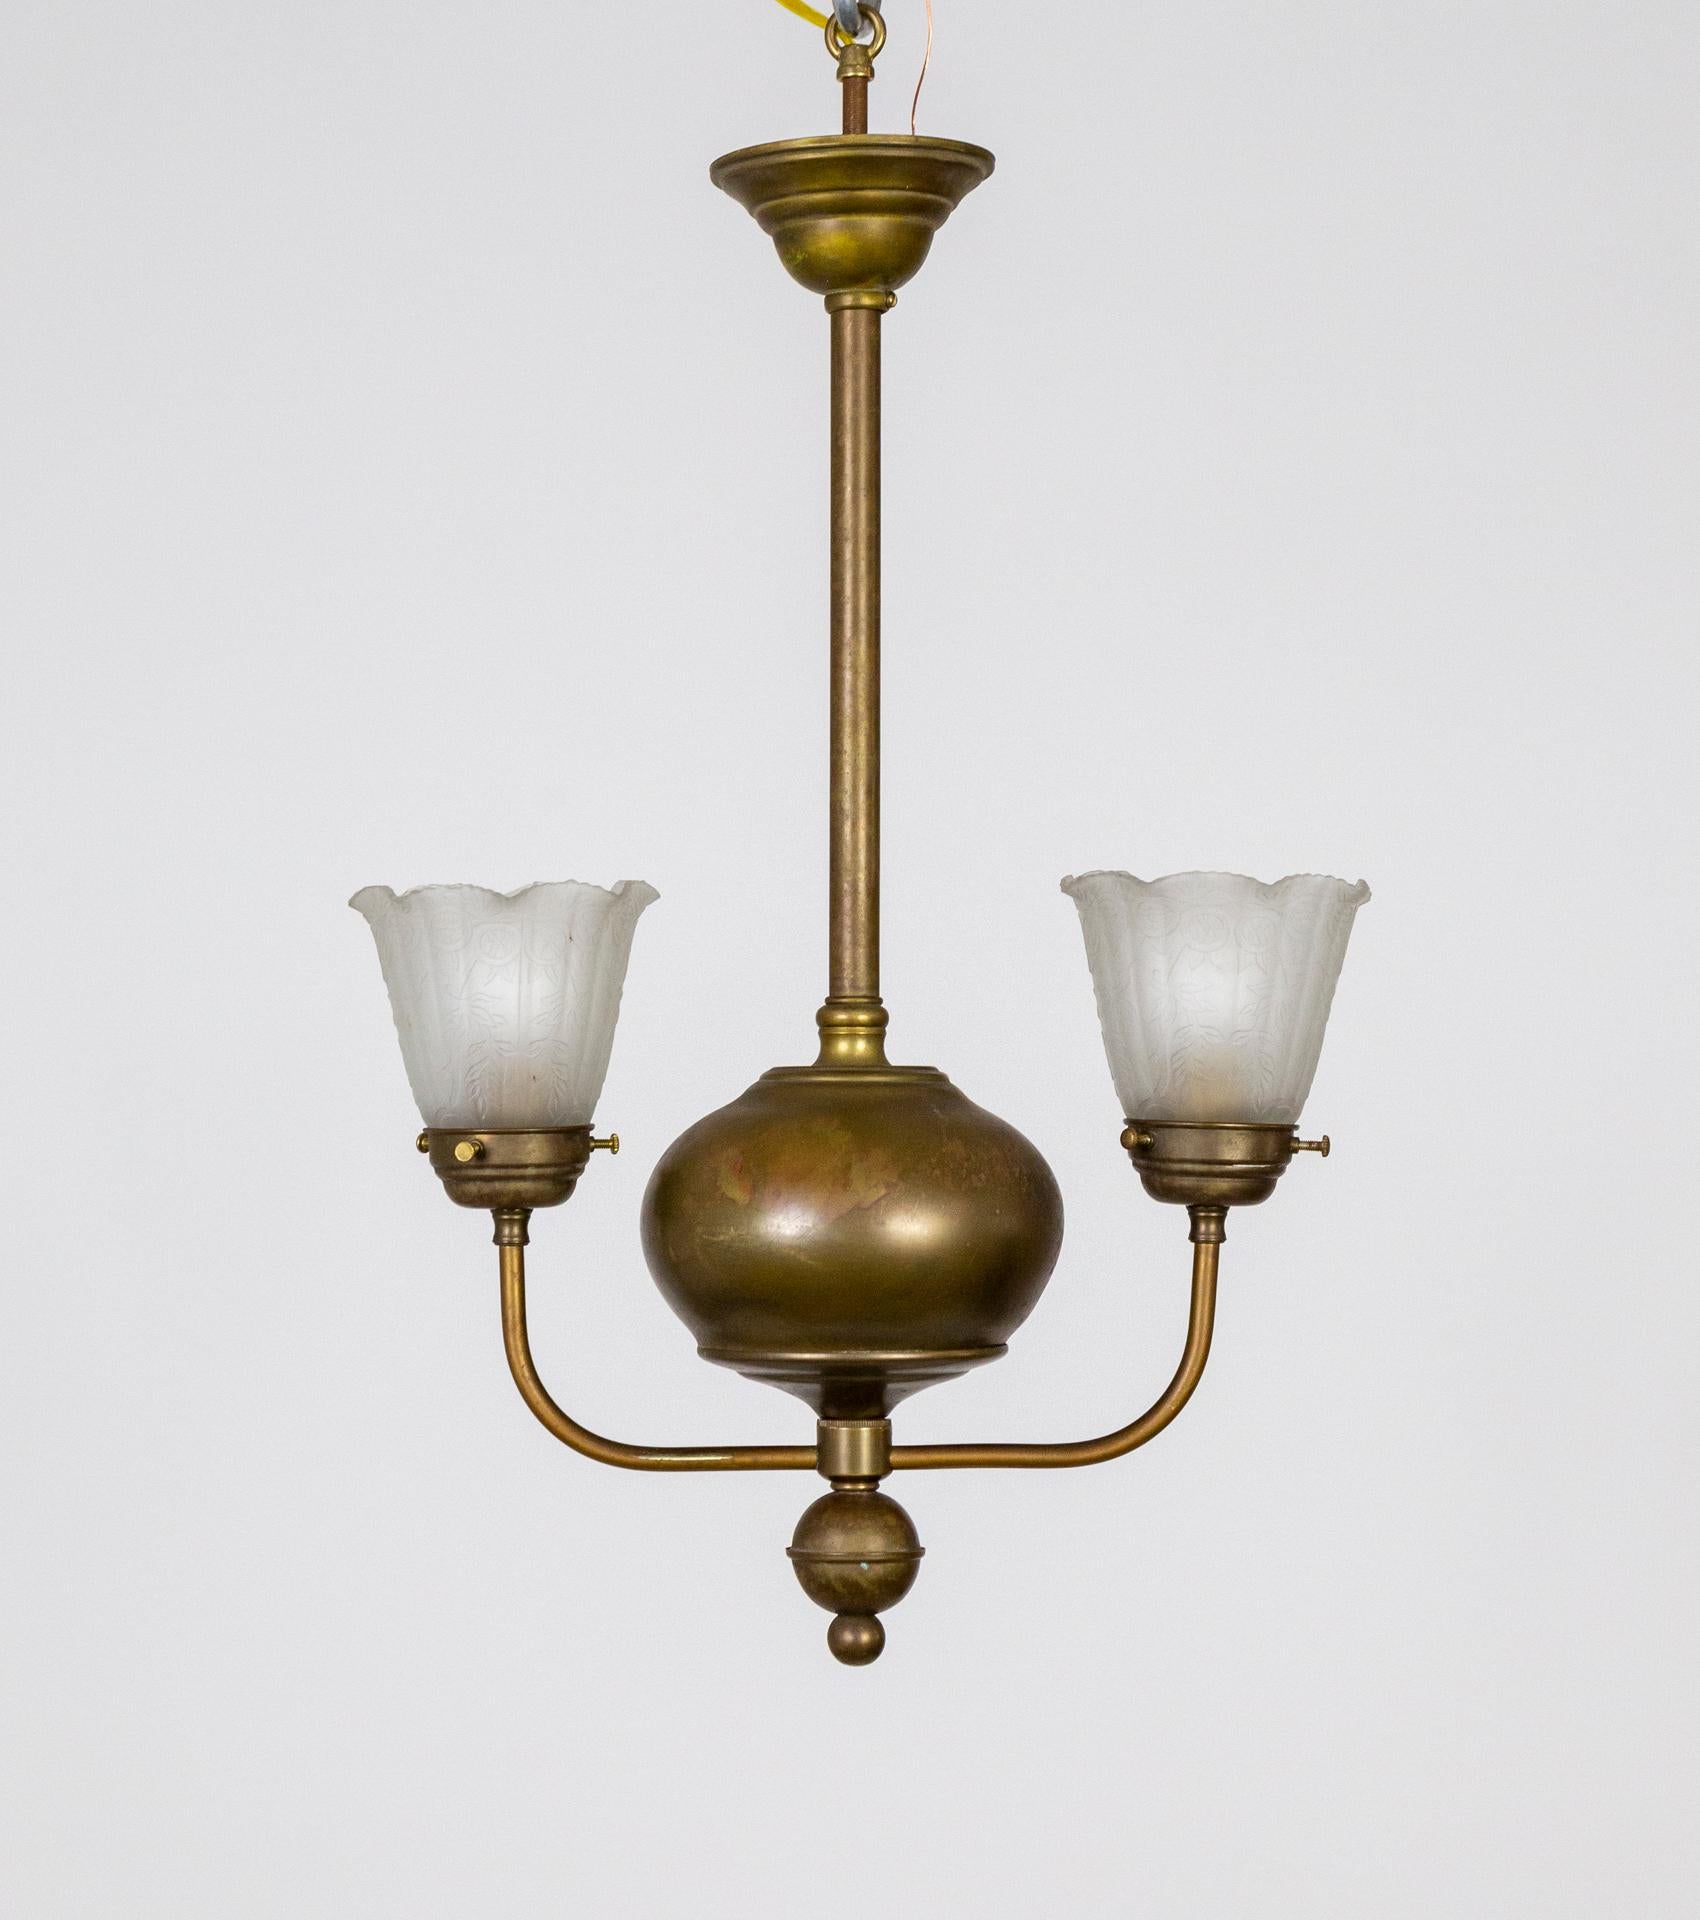 A brass ball is the streamlined, main body of this well proportioned, pendant style chandelier with two slim, upward facing arms. With pleasing brass patina and Victorian, embossed, frosted glass, flower shades. Newly wired. 2 medium base sockets.